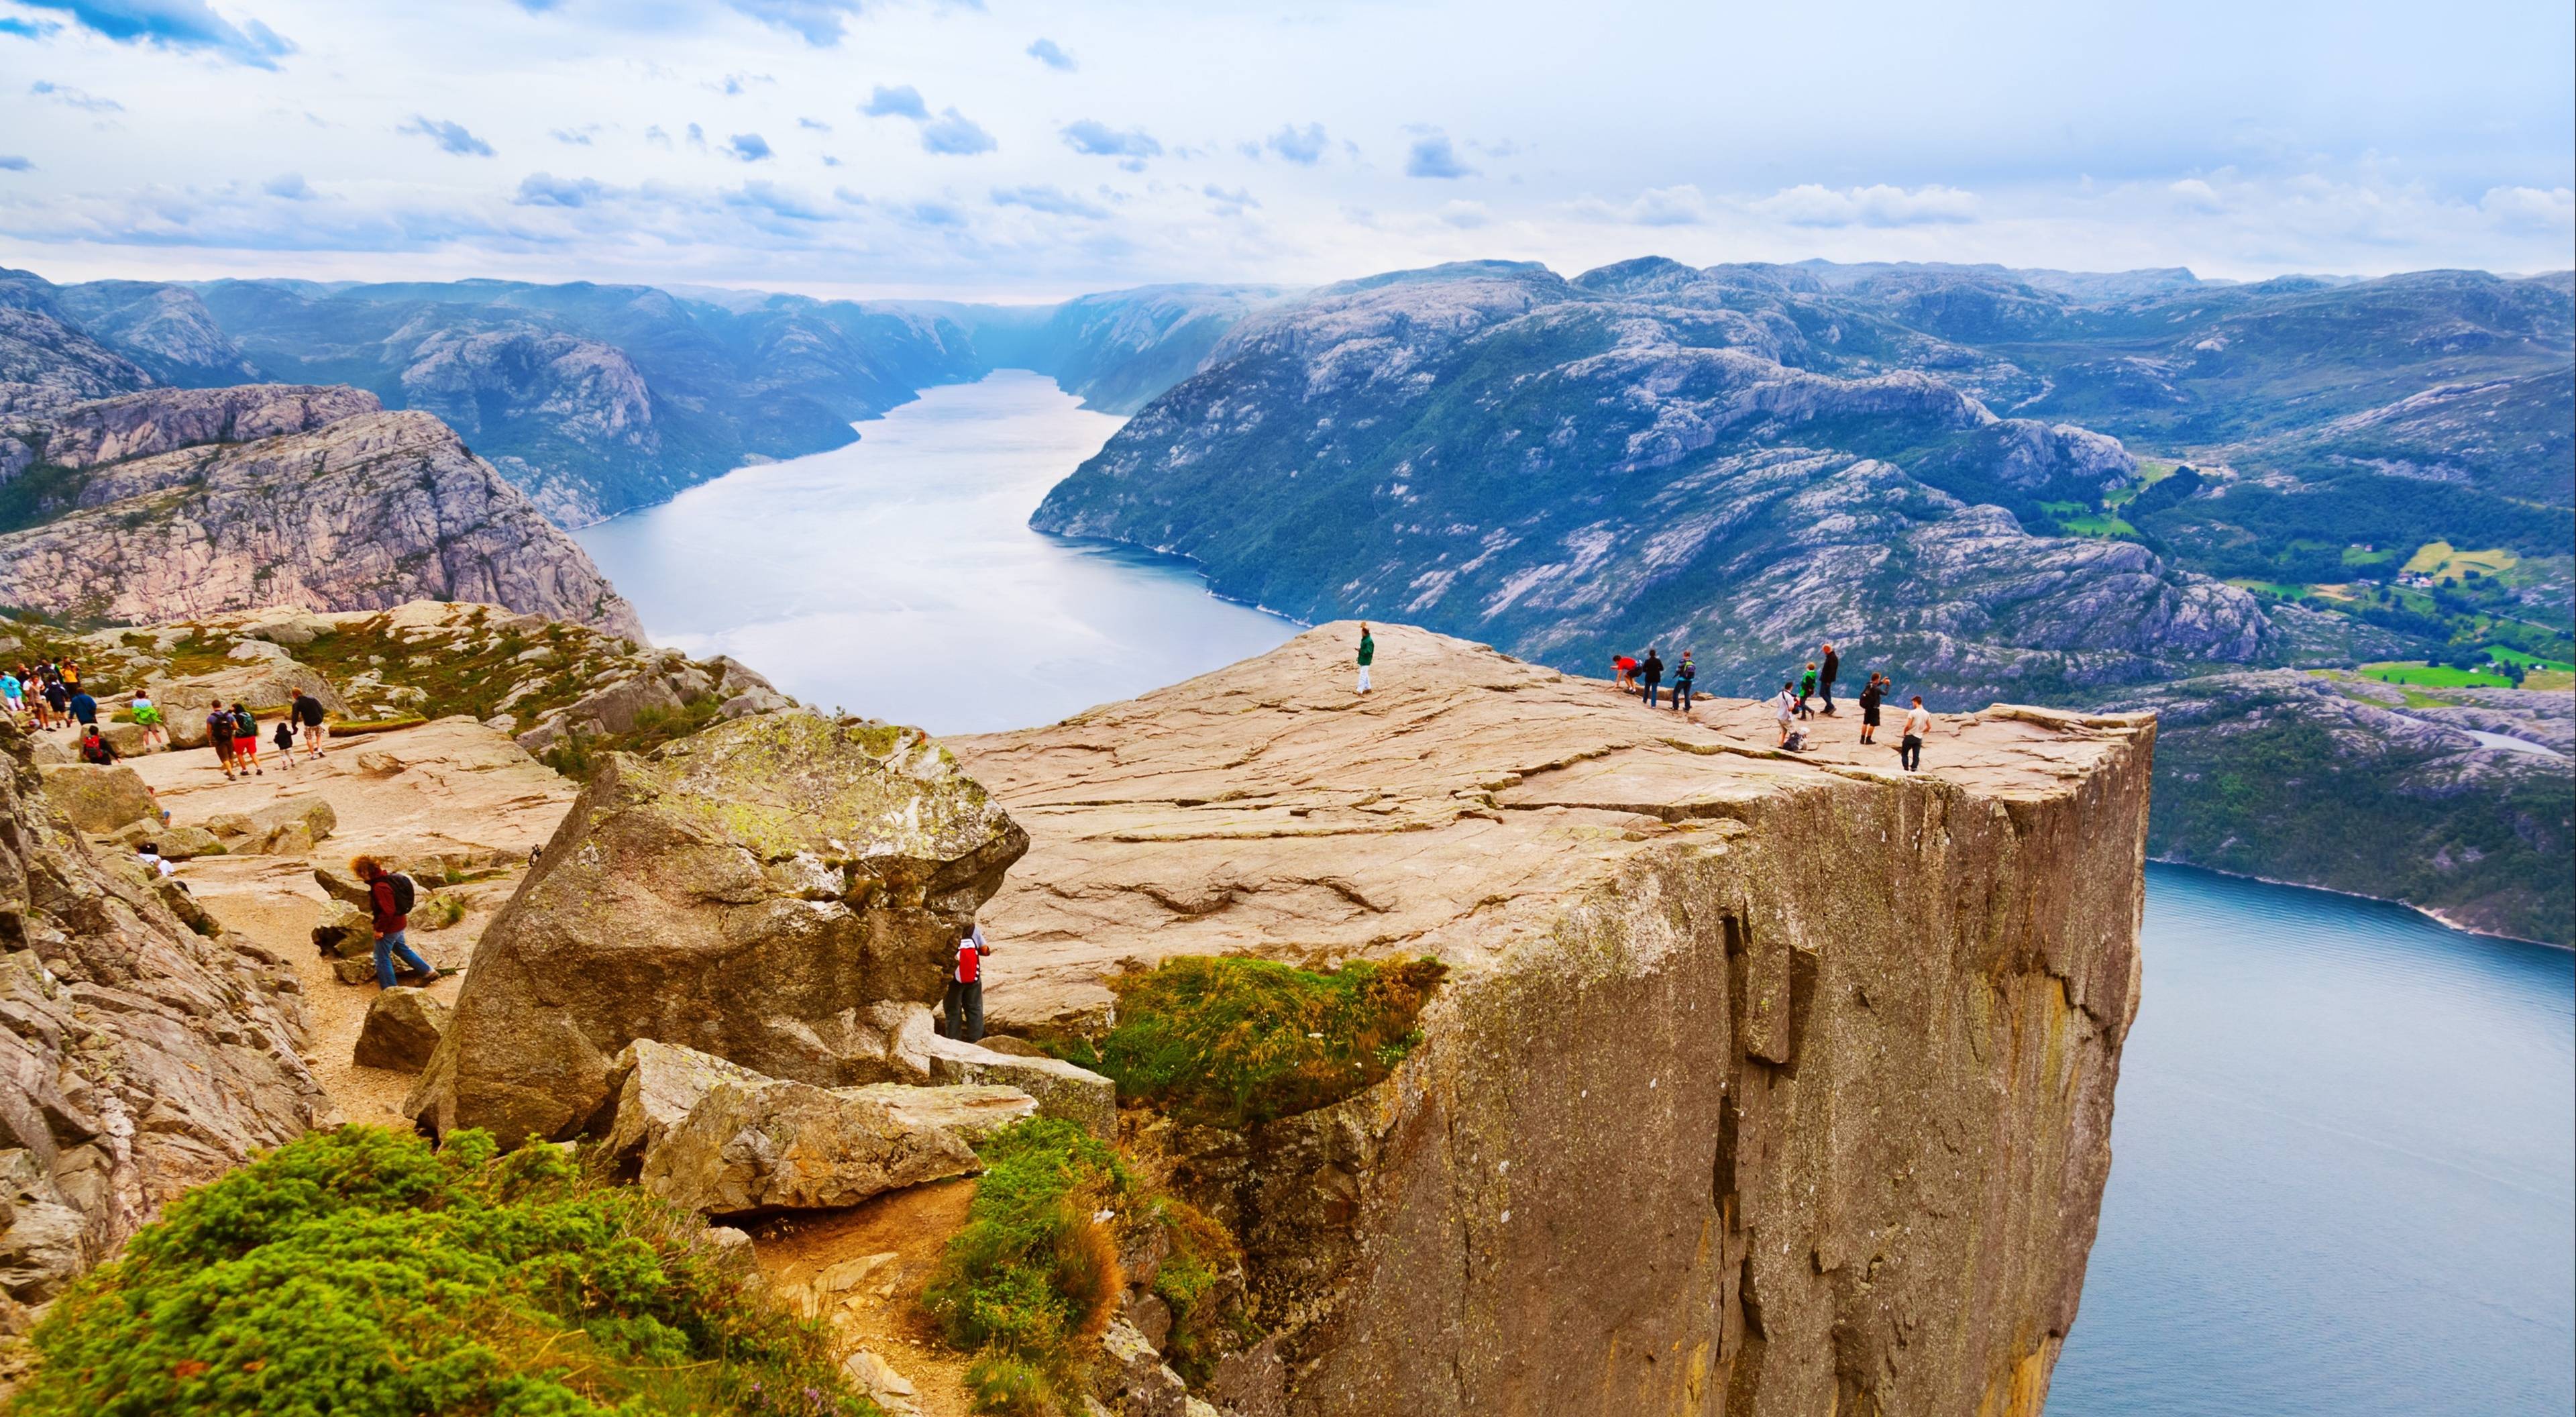 Historical Insights and Unforgettable Hikes from Bergen to Stavanger